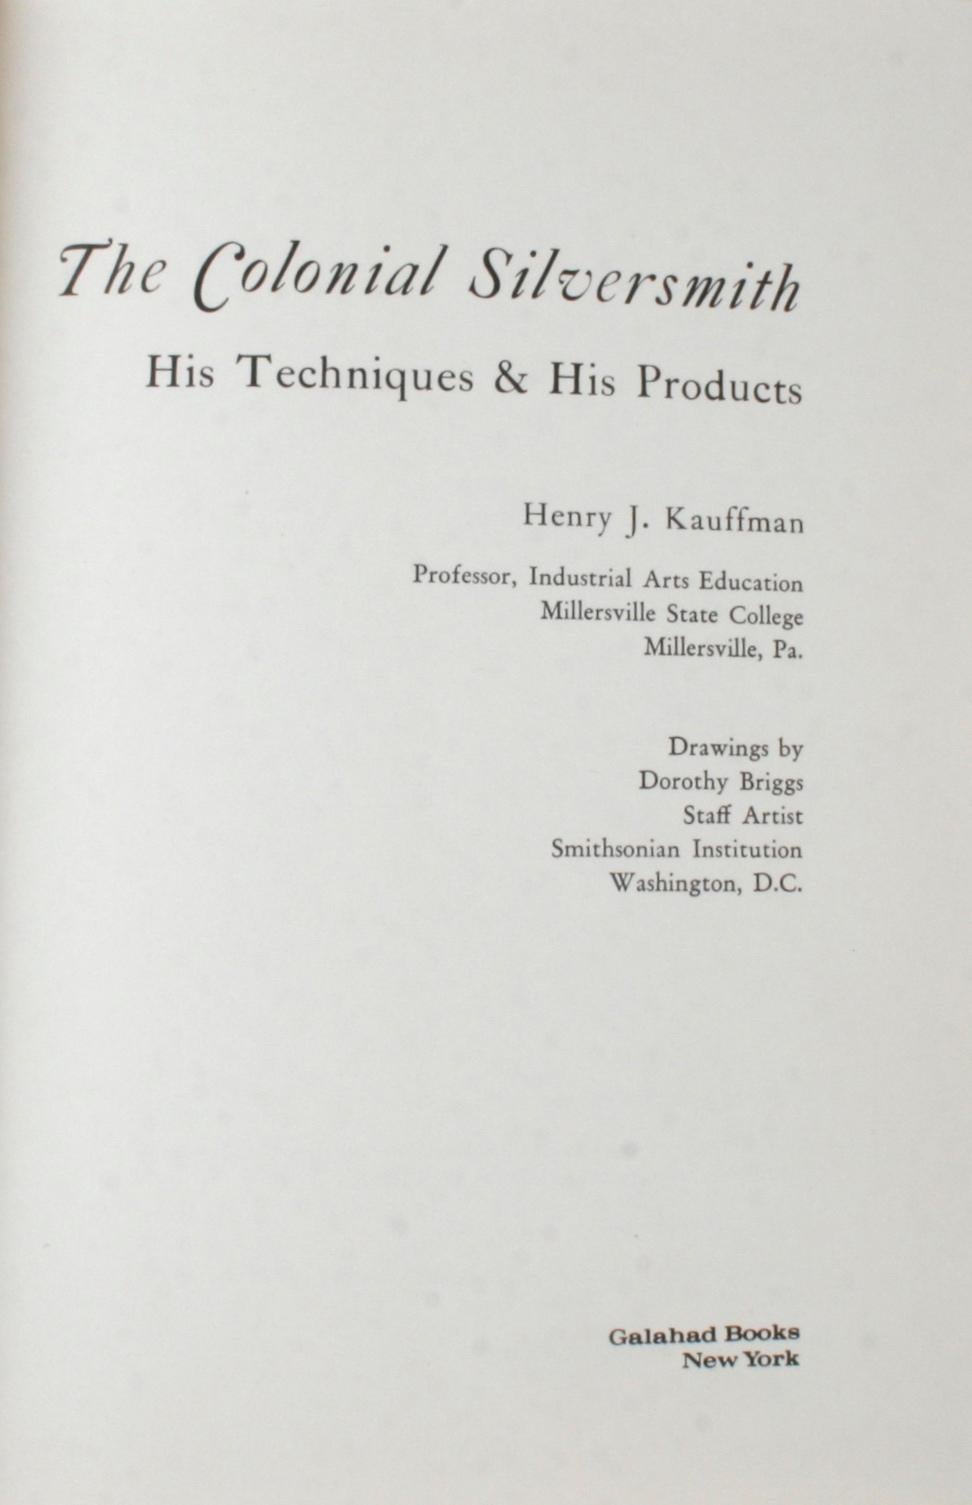 The Colonial Silversmith, His Techniques & His Products by Henry J. Kauffman. New York: Galahad Books, 1969. 1st editon hardcover with dust jacket. 176 pp. An overview of Colonial silversmiths and their work. The book describes, with graphic